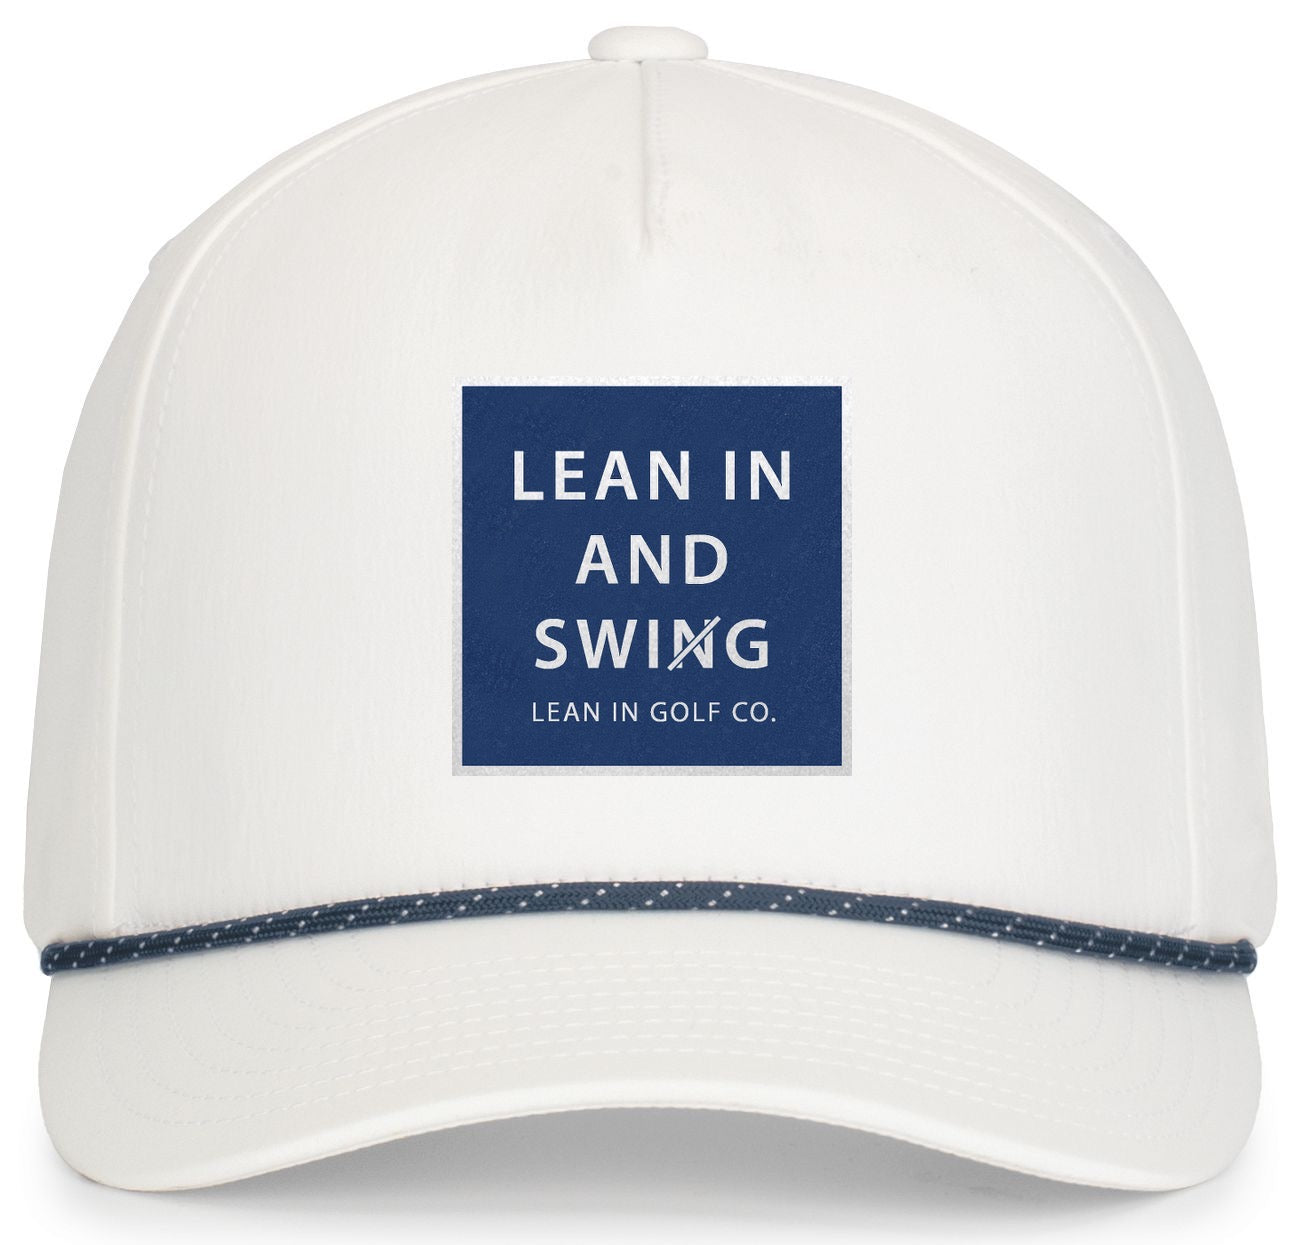 Lean in and Swig Square Logo Rope hat